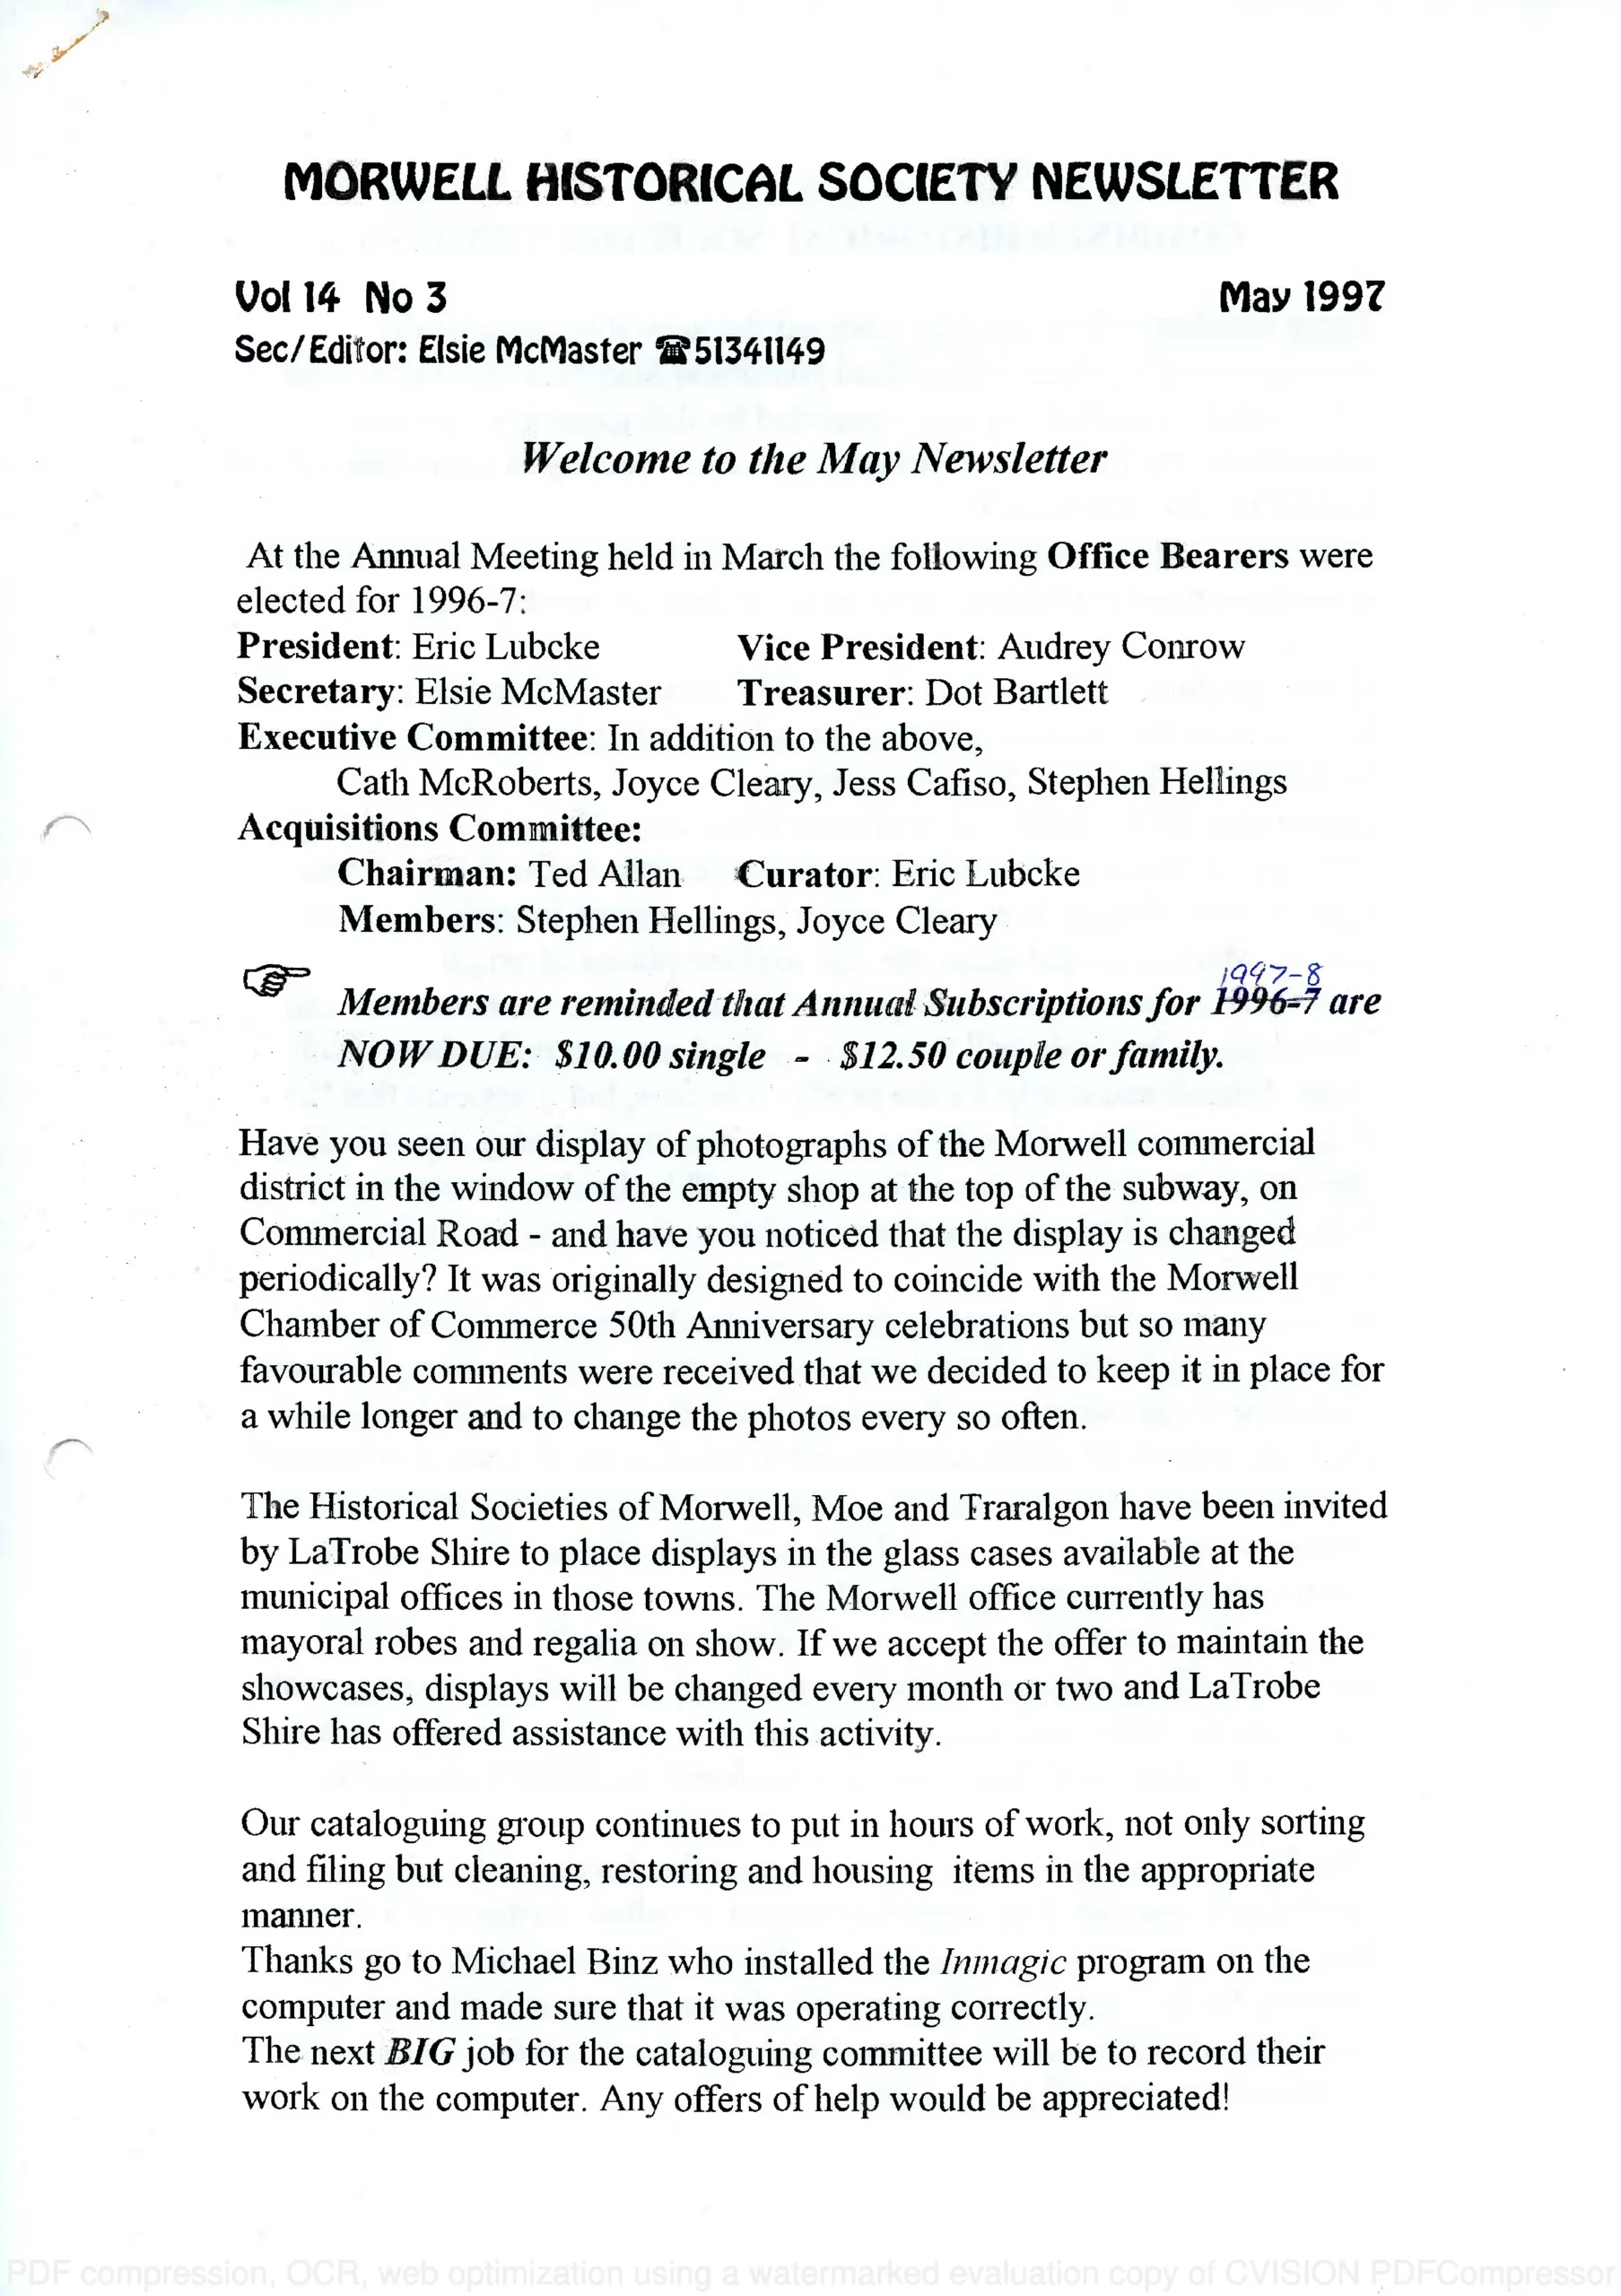 Newsletter May 1997